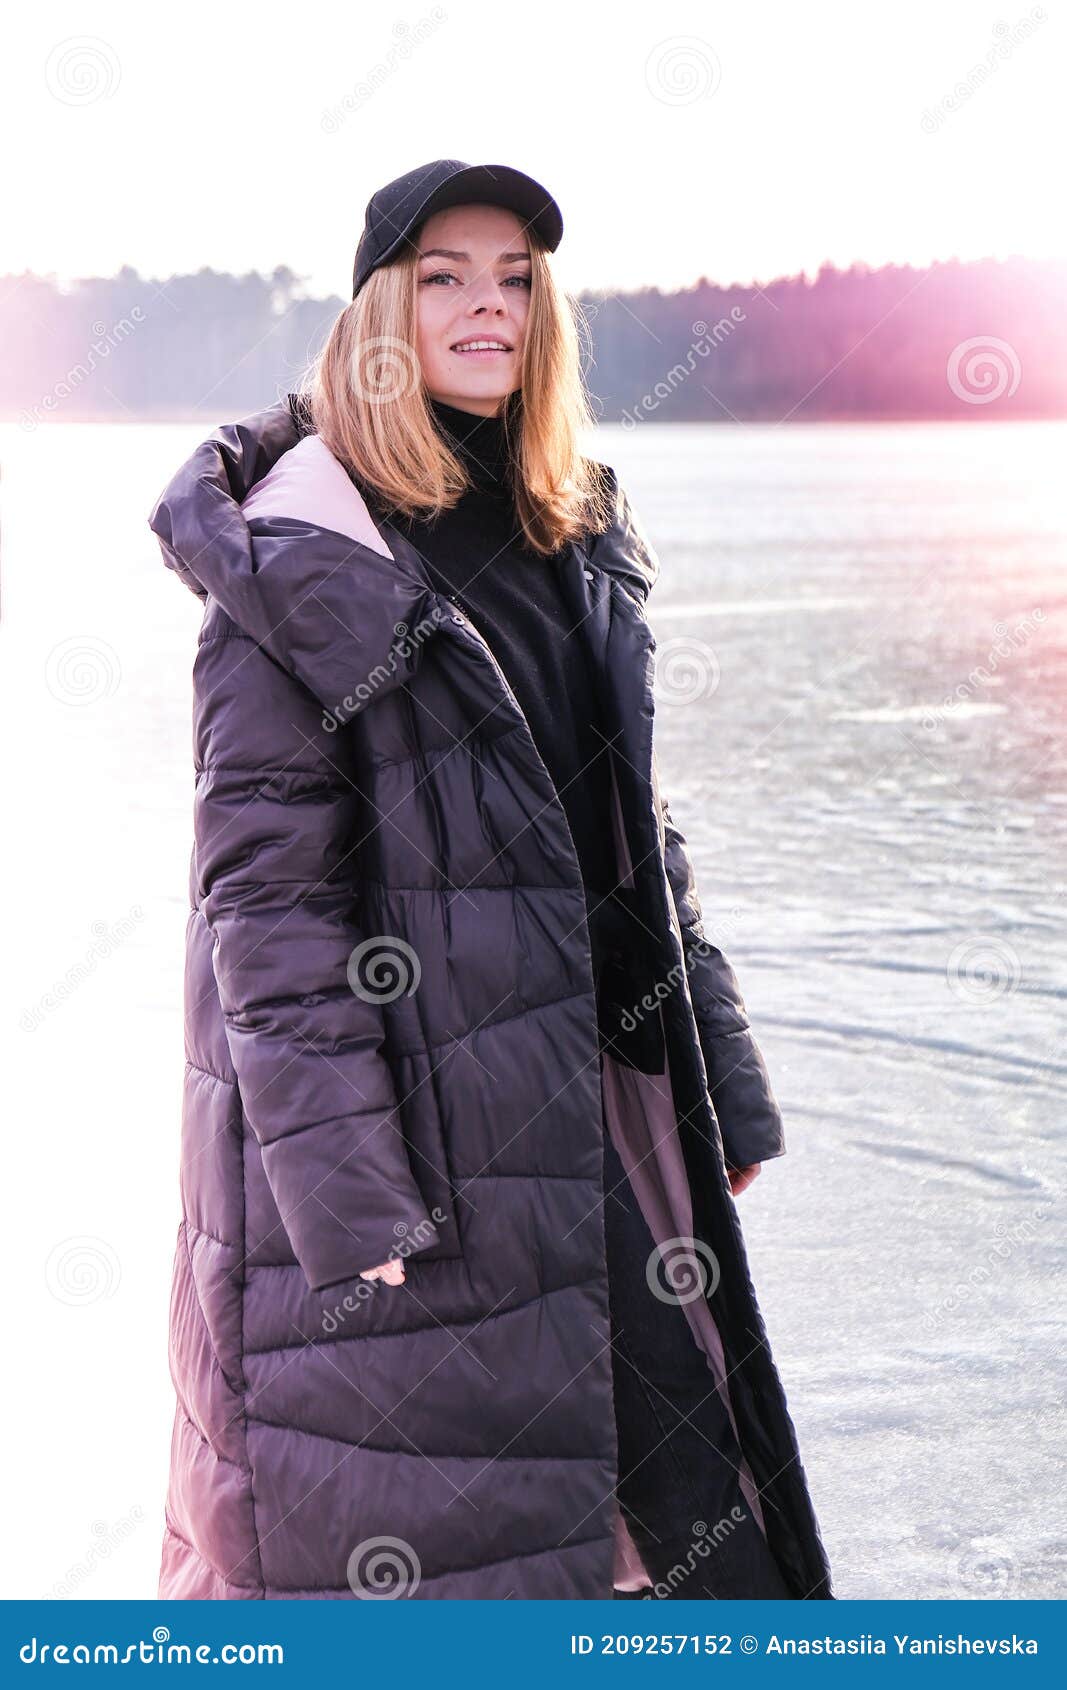 young female smiling and looking at a camera in a snow landscape. happy hipster girl with hip hop warm winter clothes. staying on